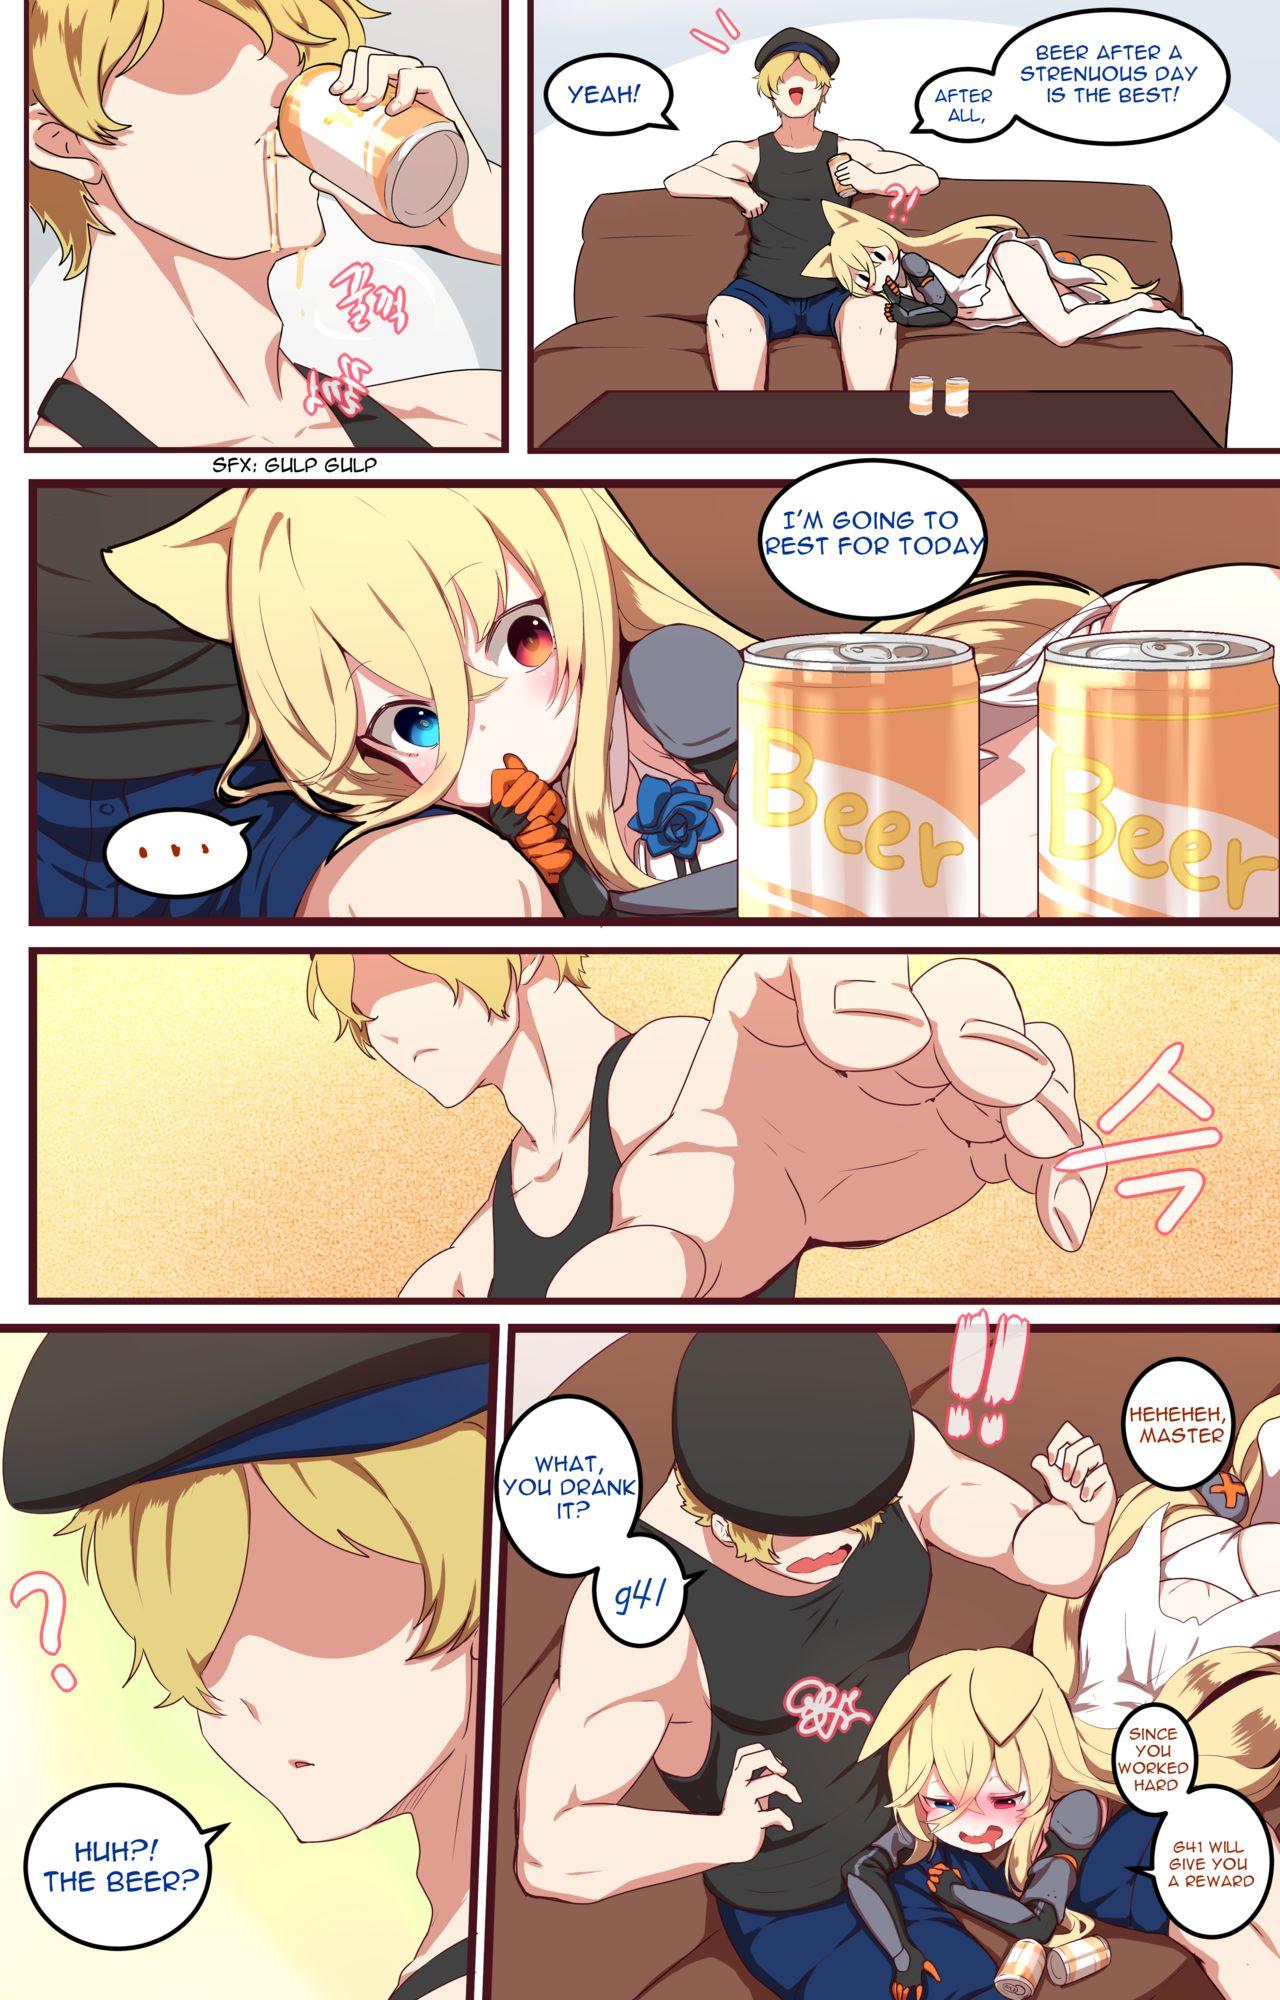 Car How to Use Dolls 04 - Girls frontline Teen - Page 5